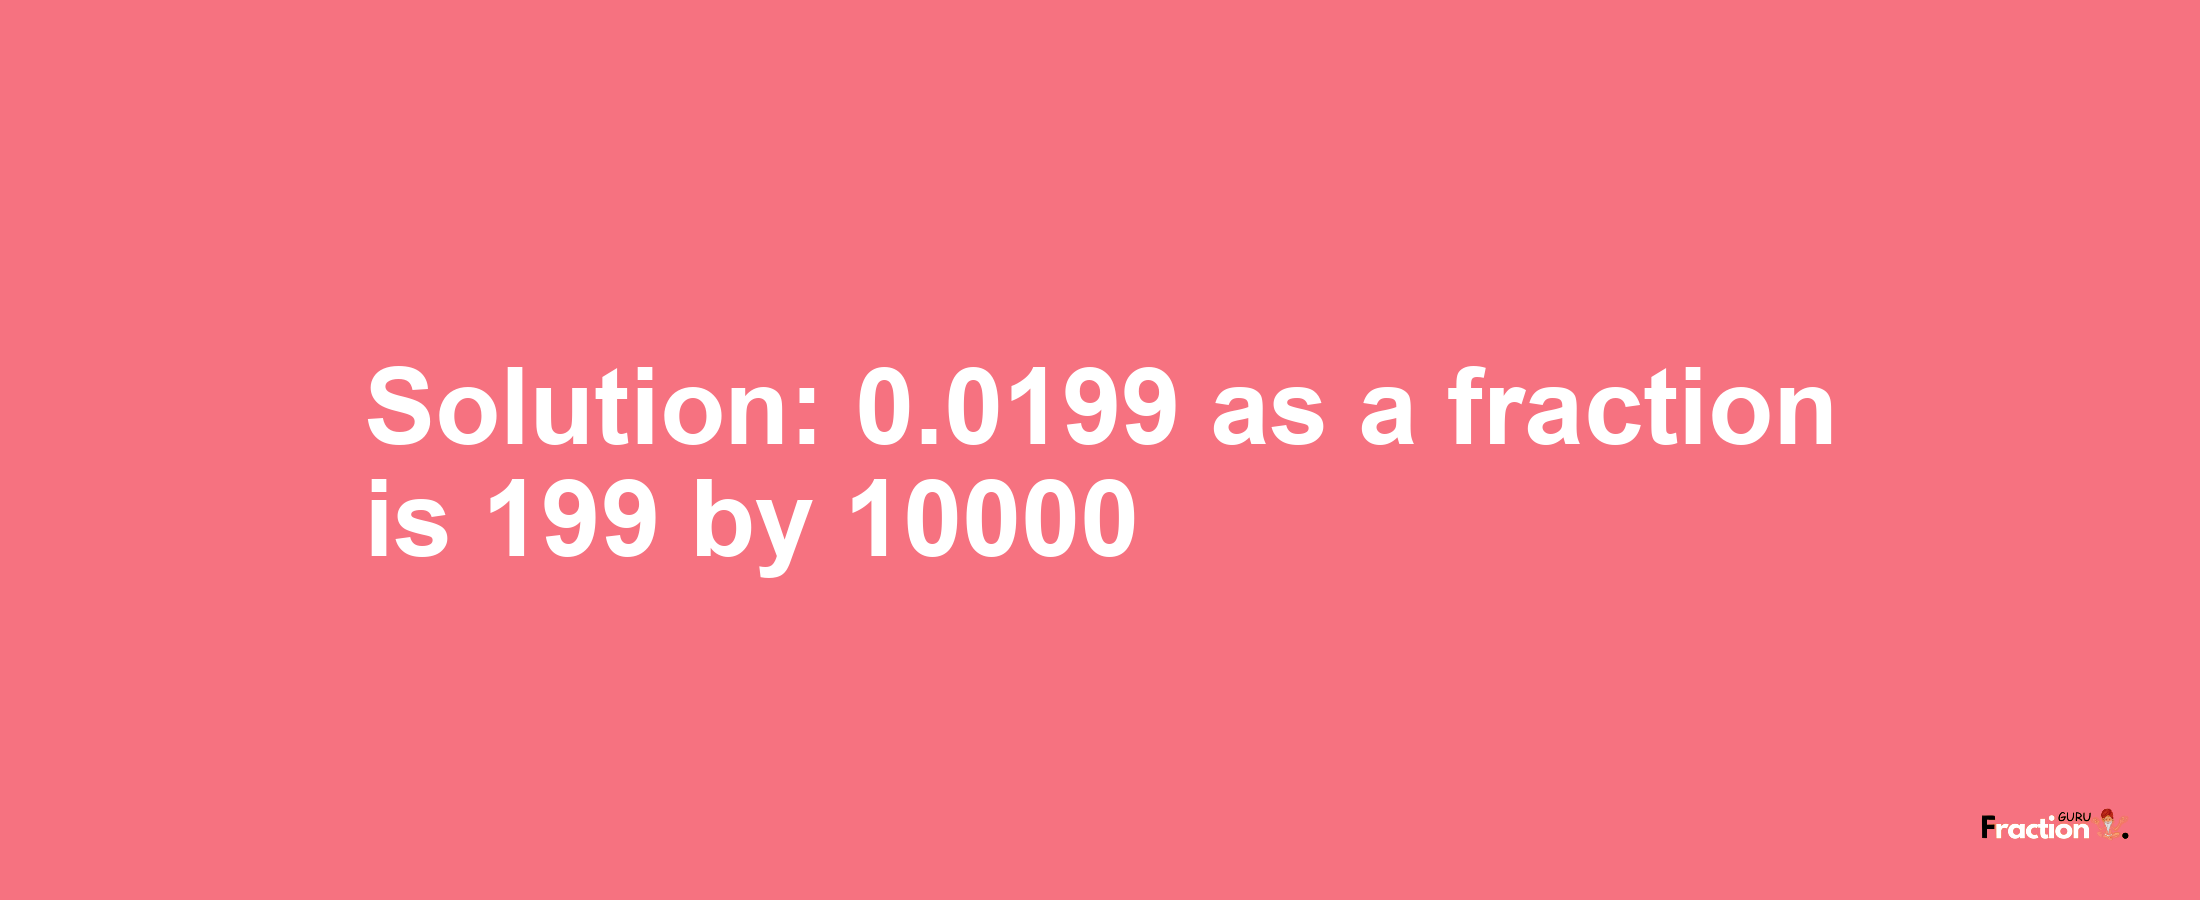 Solution:0.0199 as a fraction is 199/10000